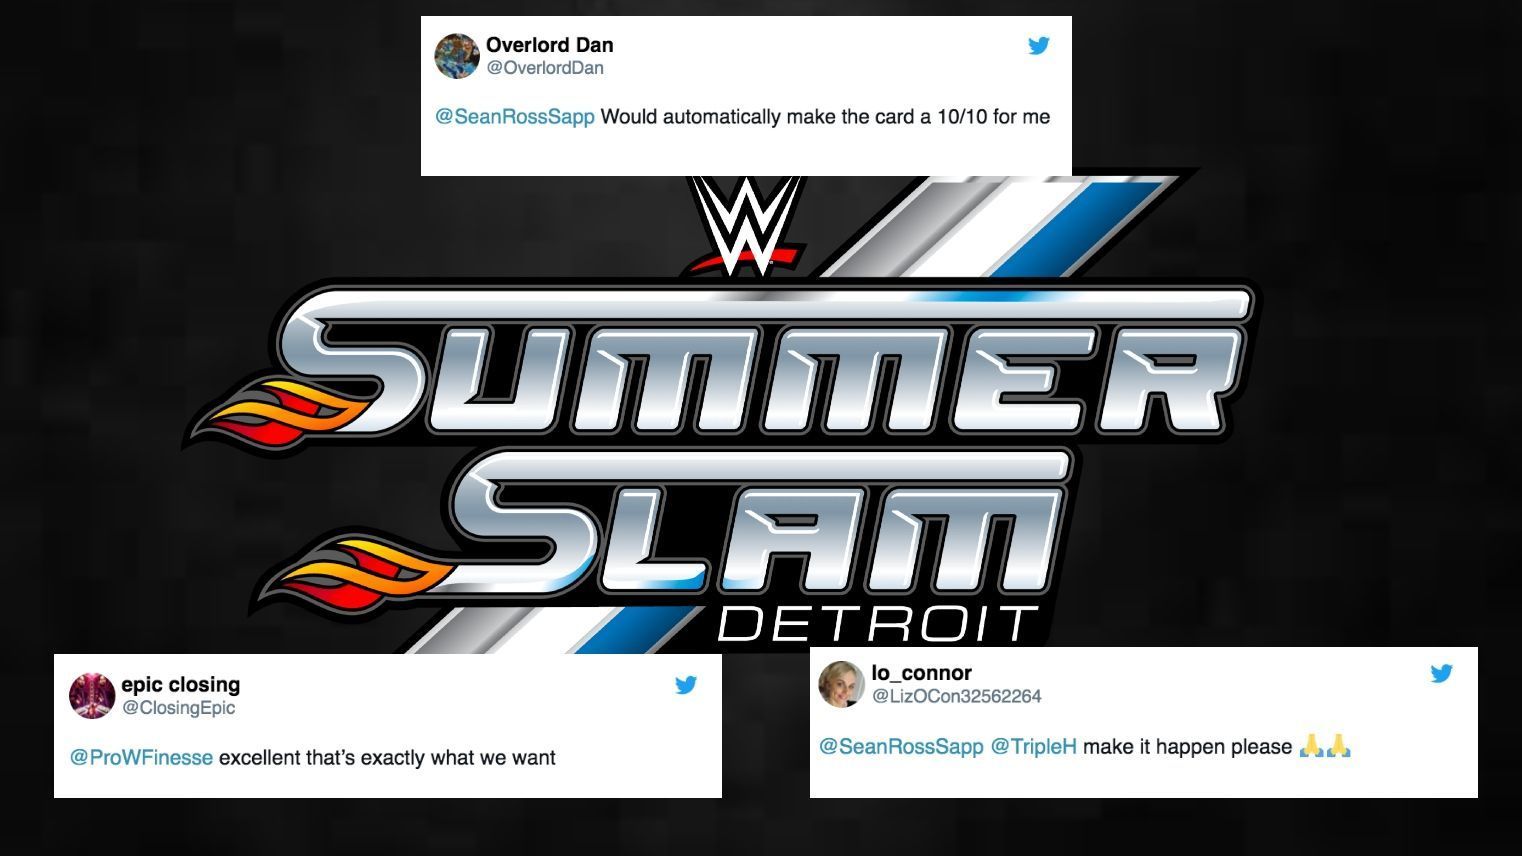 SummerSlam is set to take place on Saturday August 5th 2023.